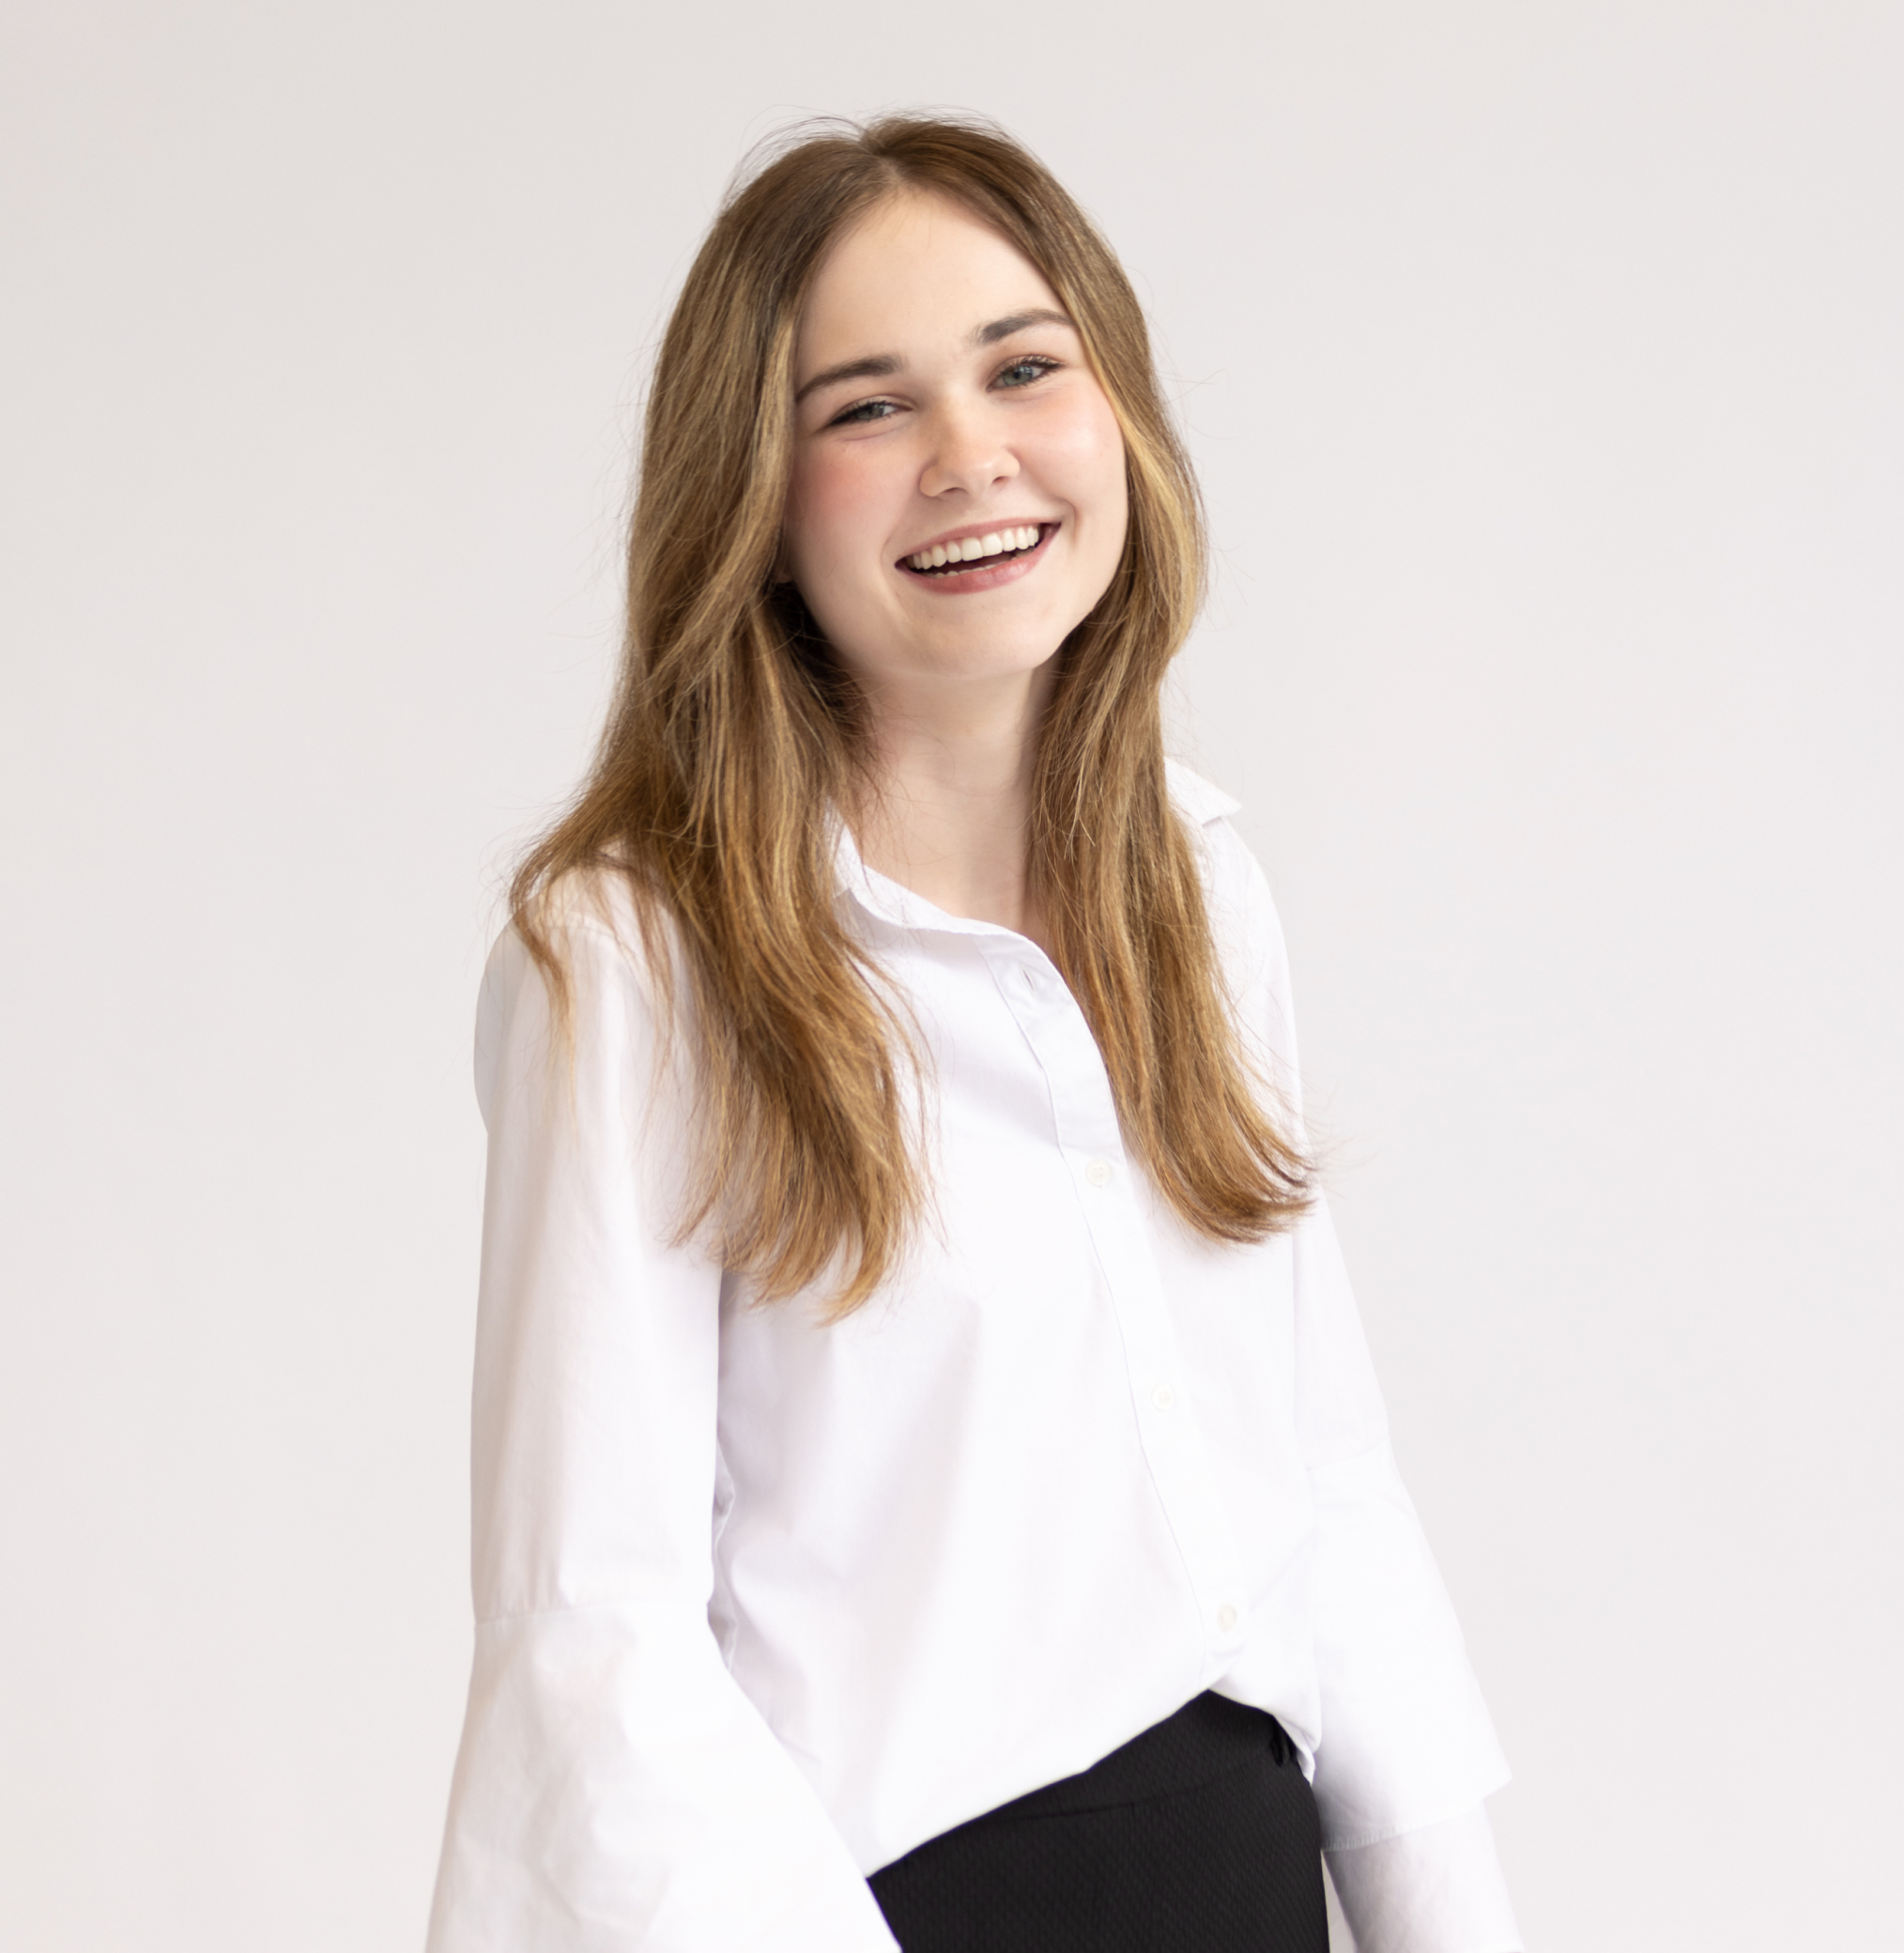 headshot of Kenzie, standing in a white button up top with black dress pants with. Laughing and smiling face while looking at the camera.